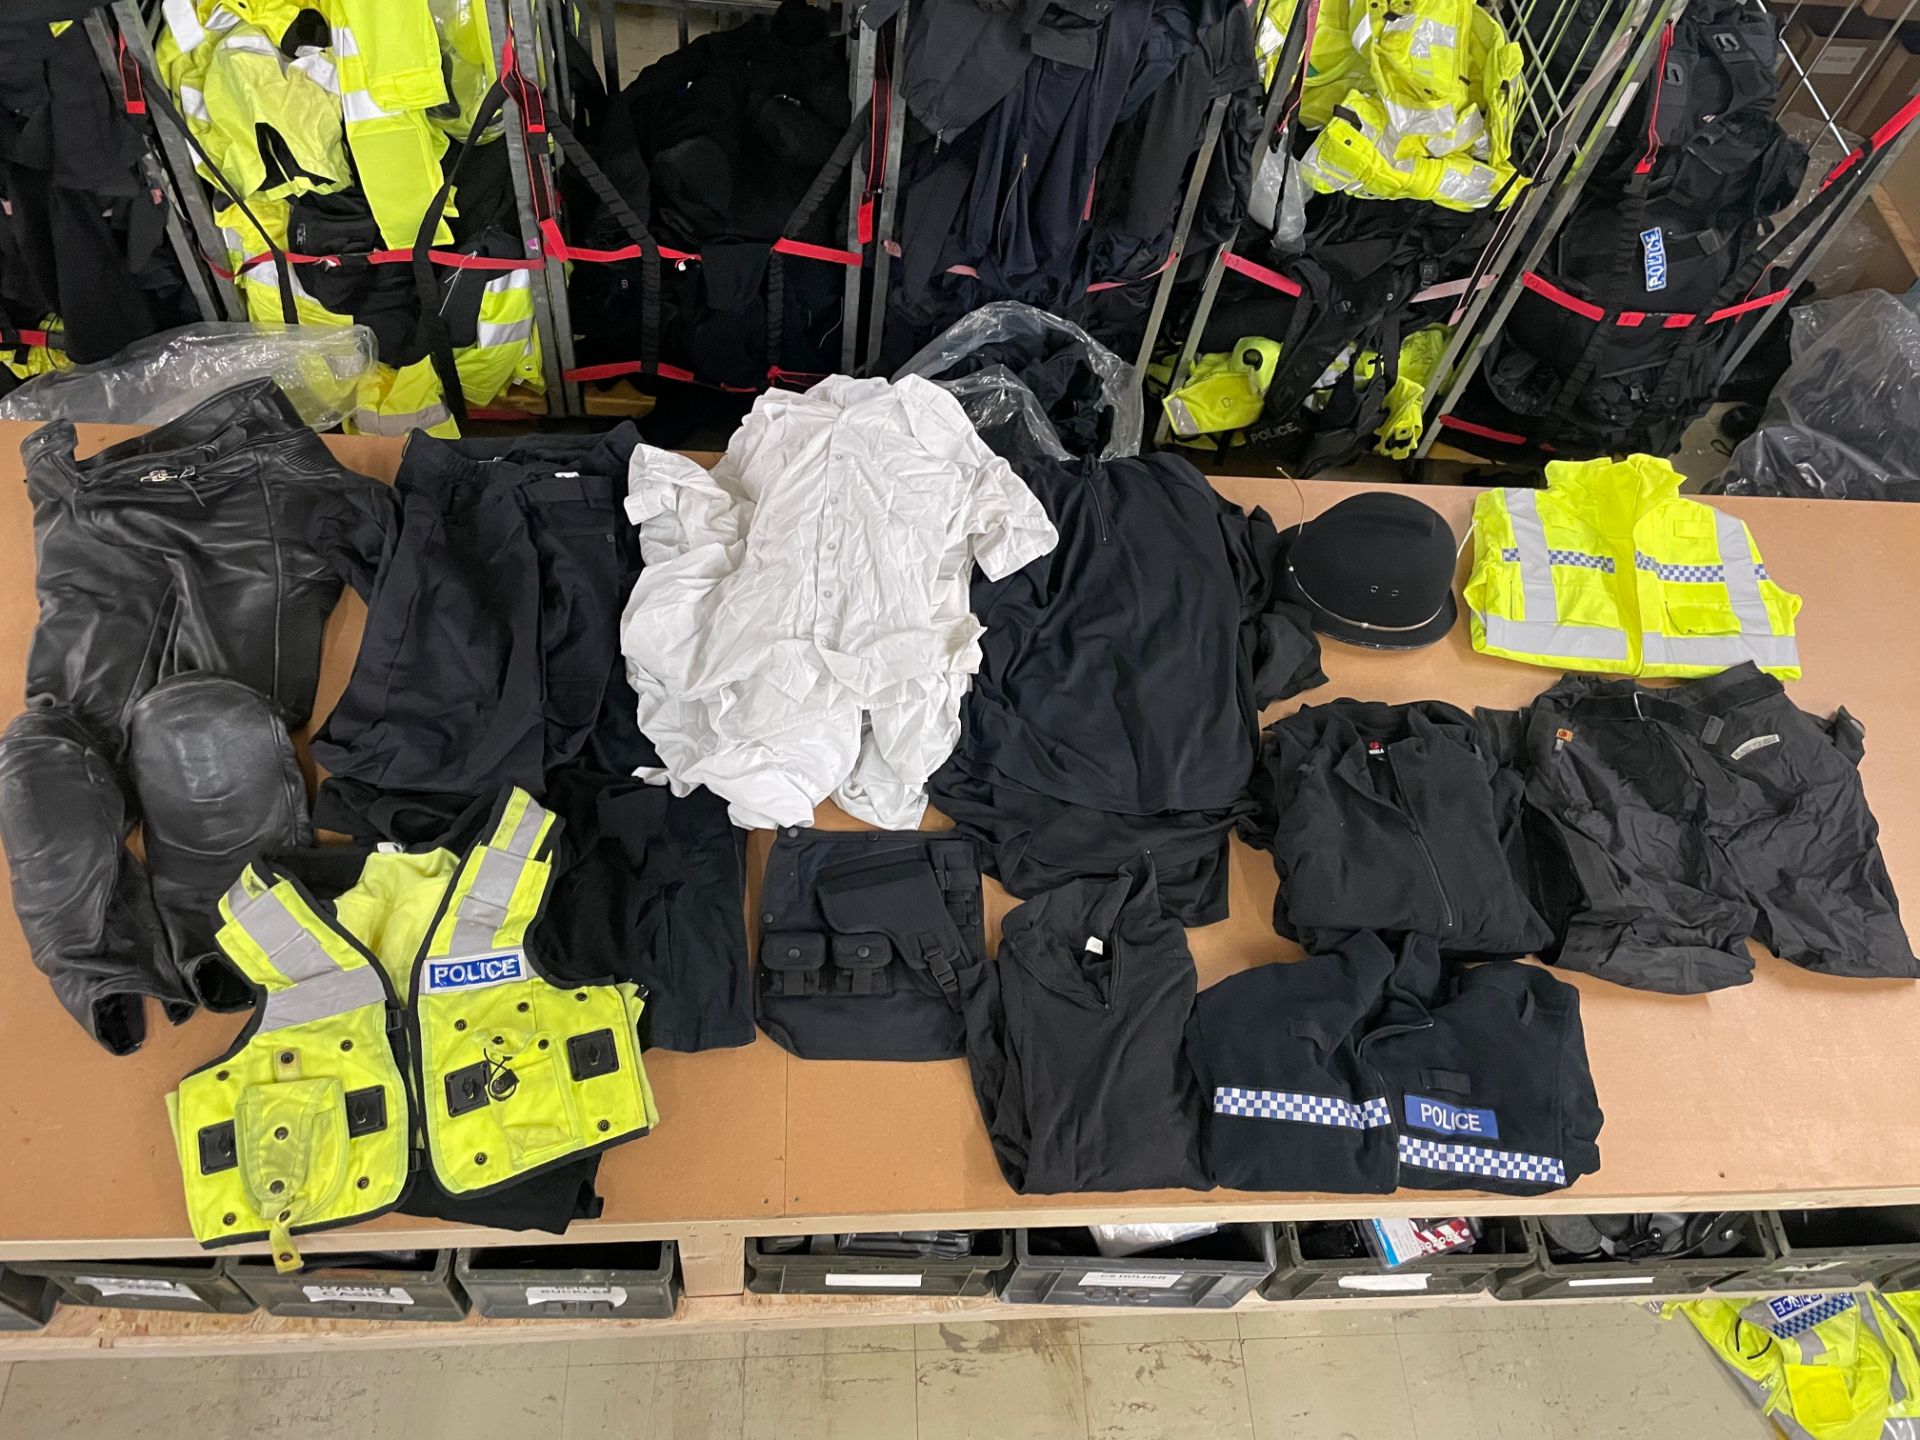 10 X BAGS OF EX POLICE CLOTHING - RRP £2750.00 - Image 12 of 12